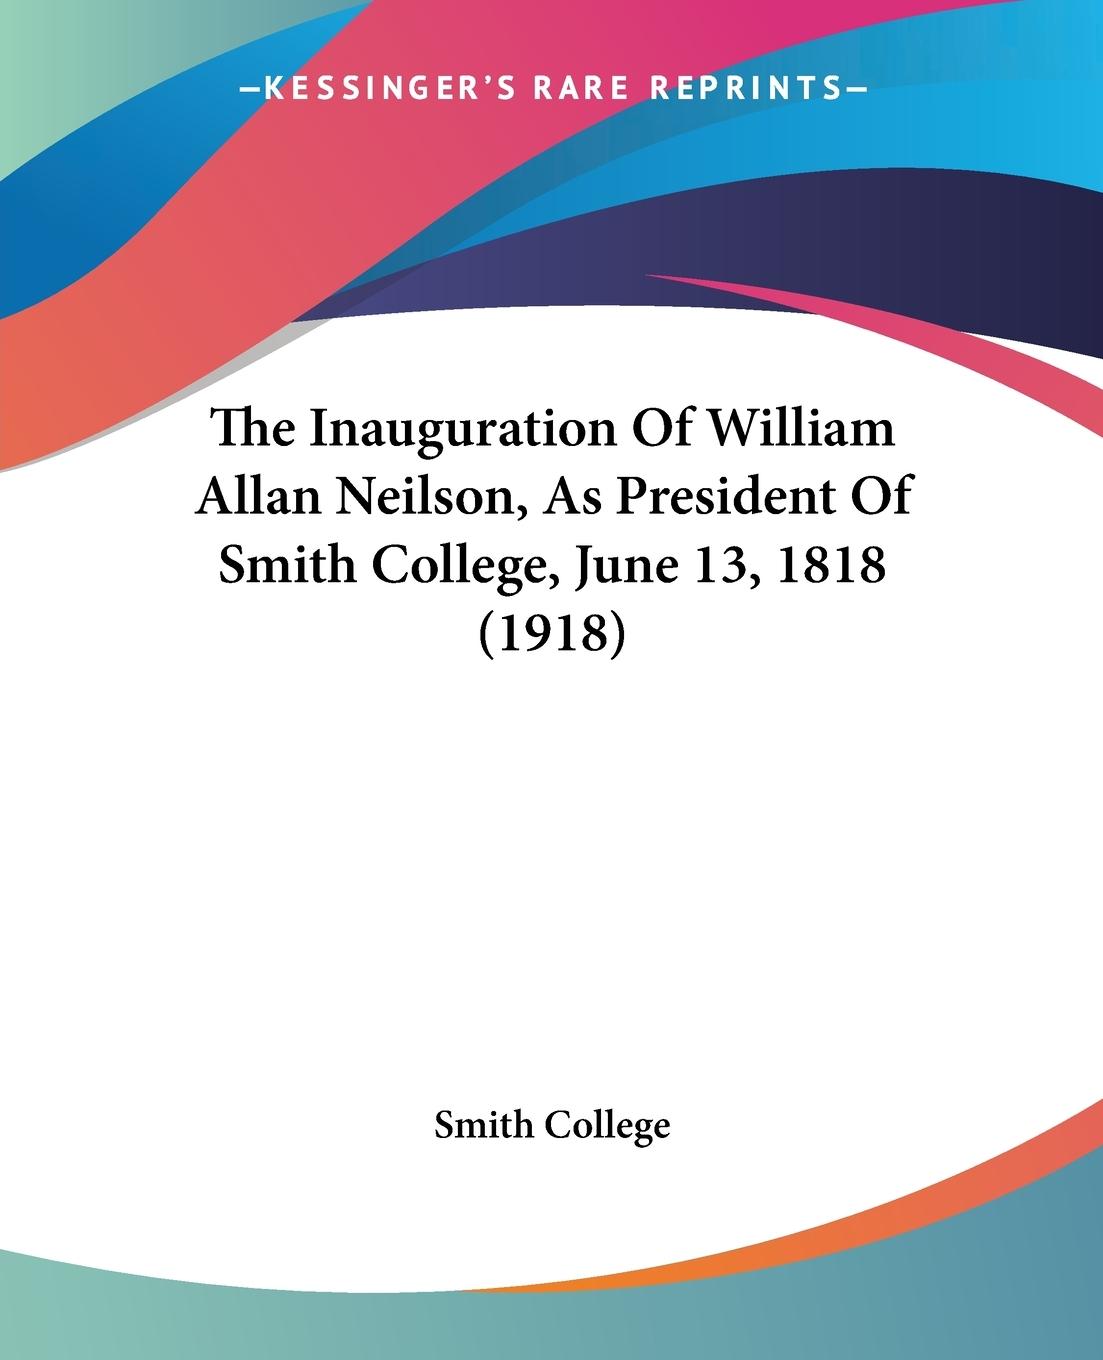 The Inauguration Of William Allan Neilson, As President Of Smith College, June 13, 1818 (1918) - Smith College